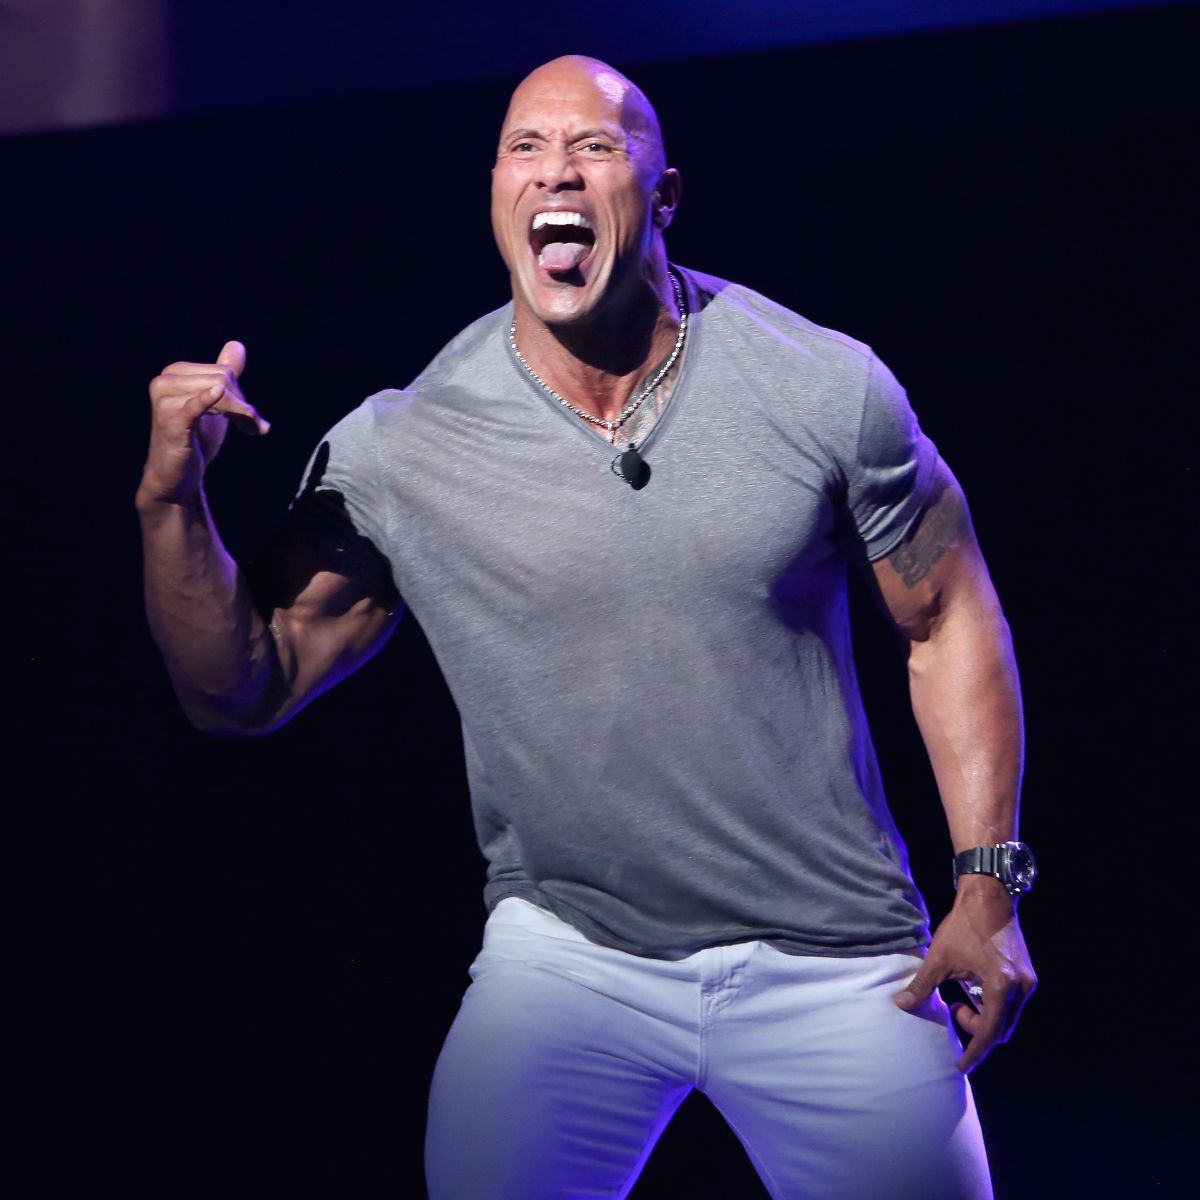 what is dwayne the rock johnson's net worth